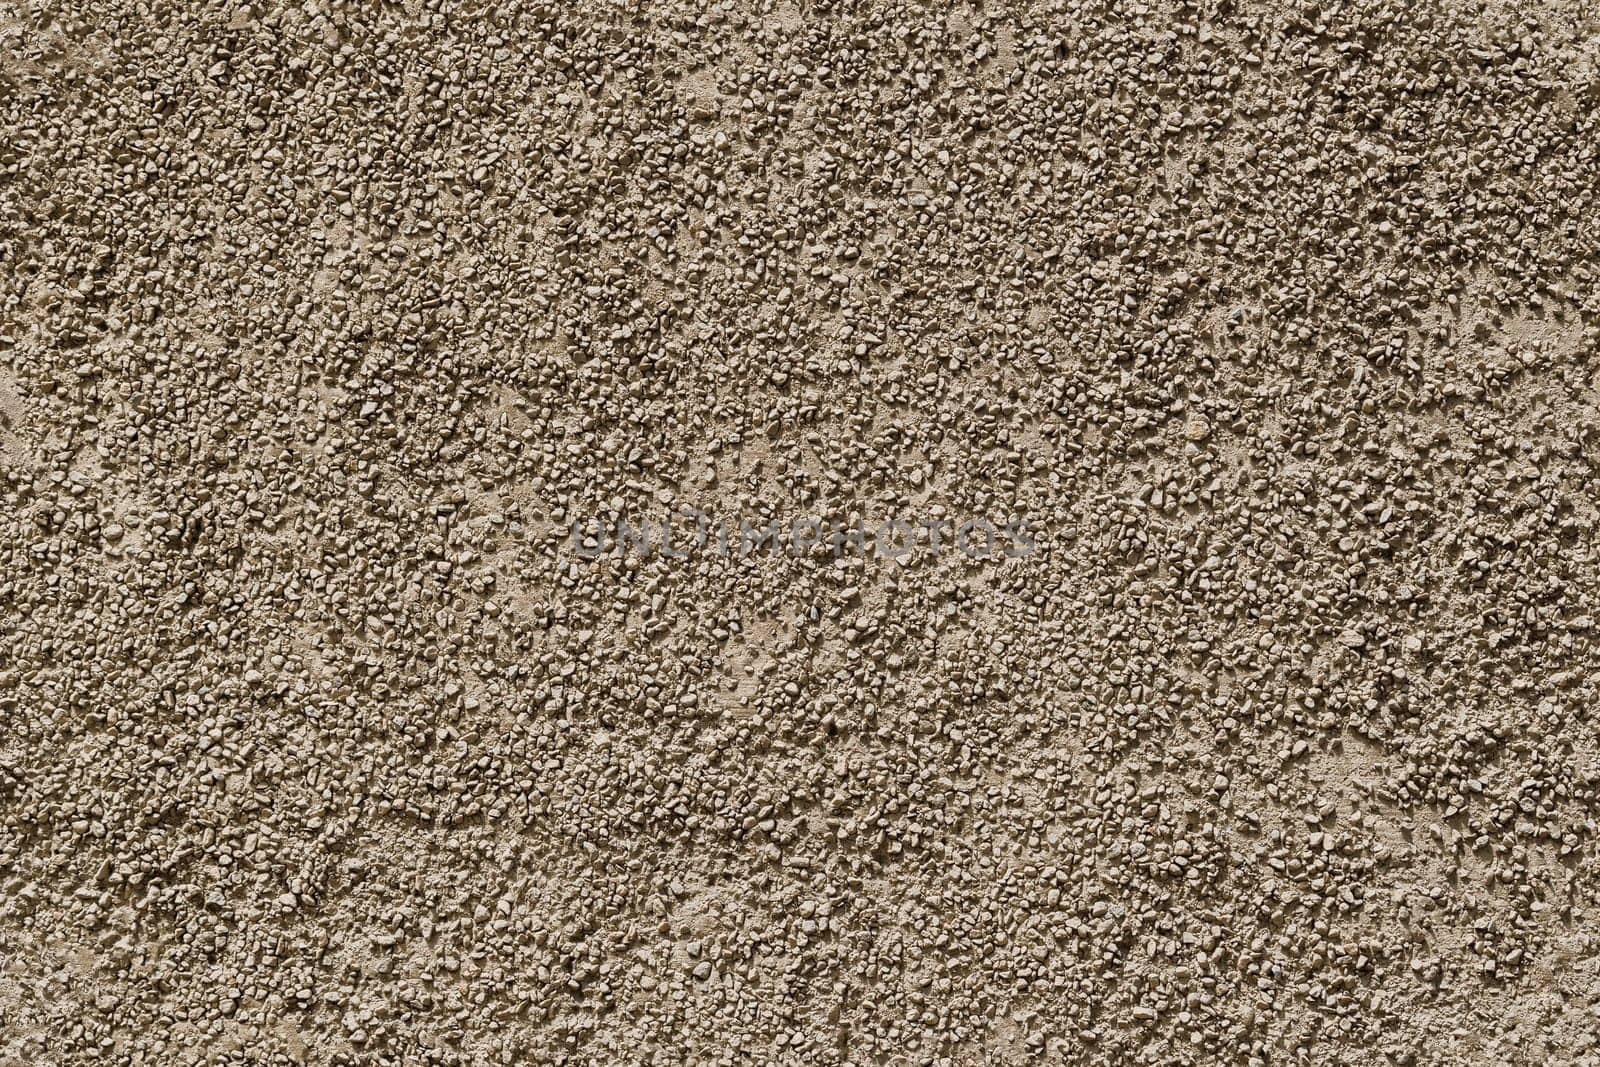 small gravel stucco wall finish seamless texture and full-frame background by z1b